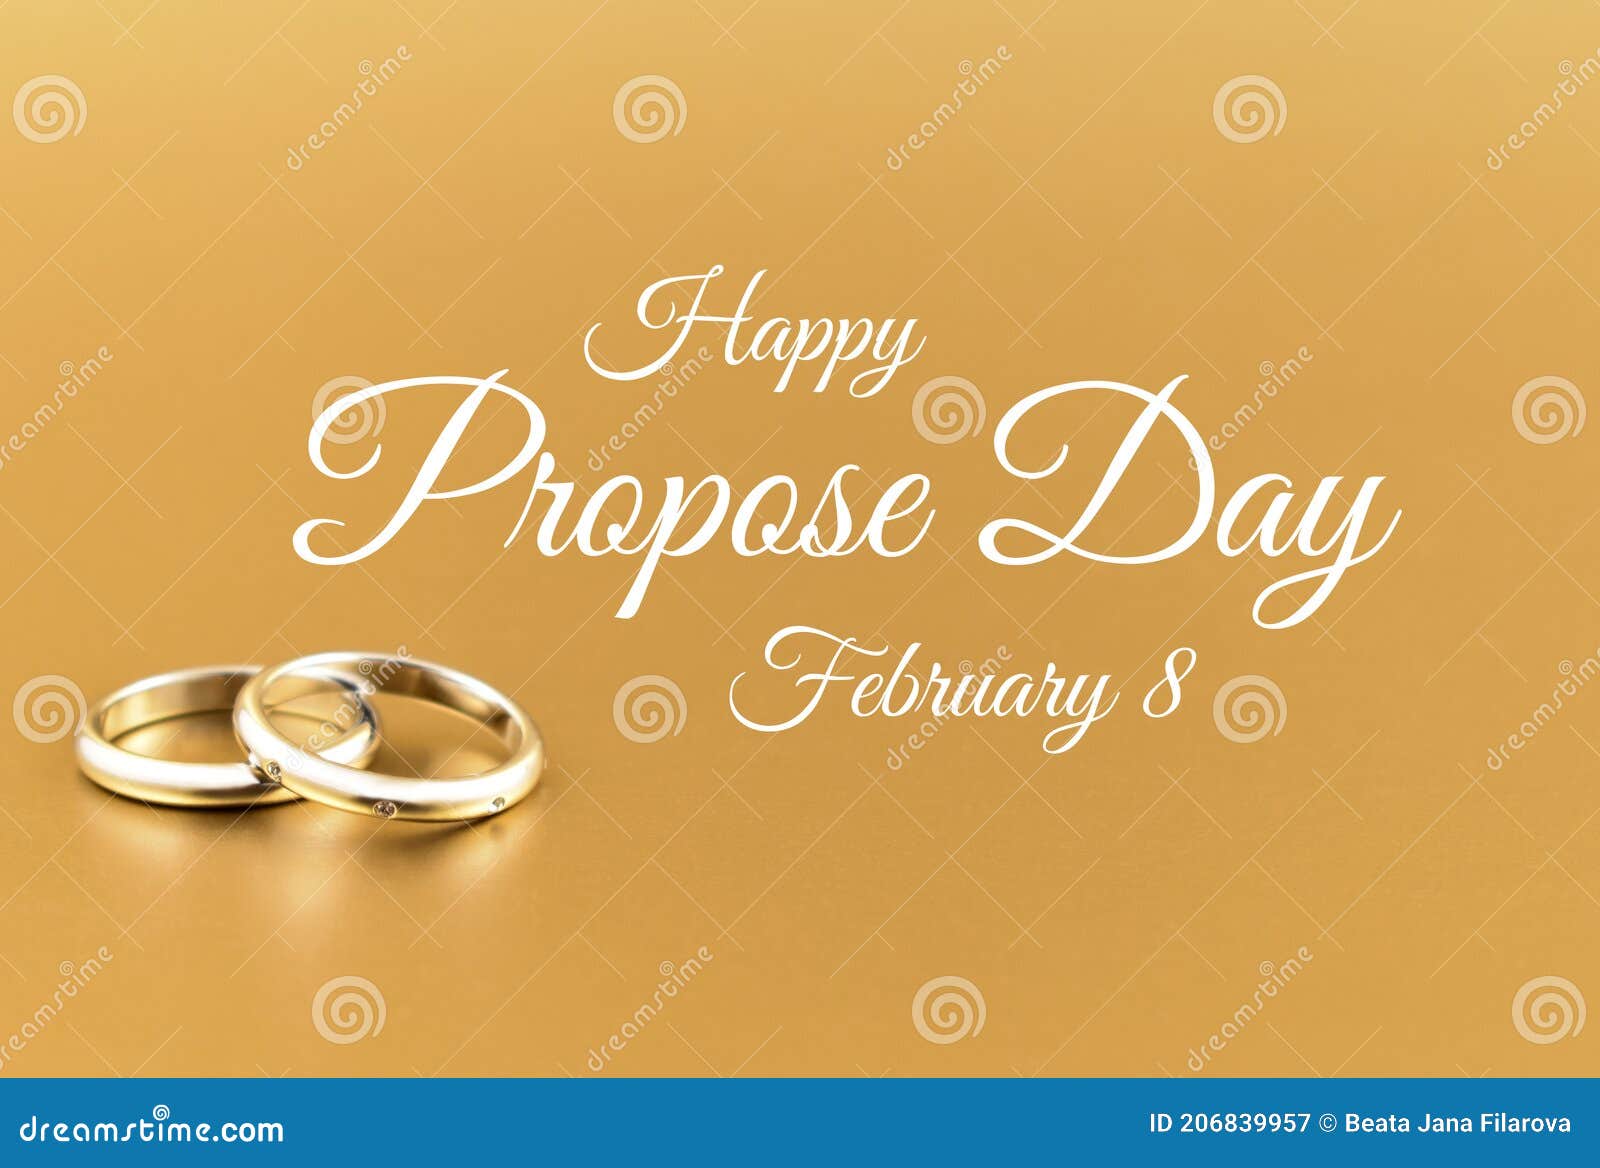 Propose Day Poster with Wedding Rings Stock Images Stock Image ...